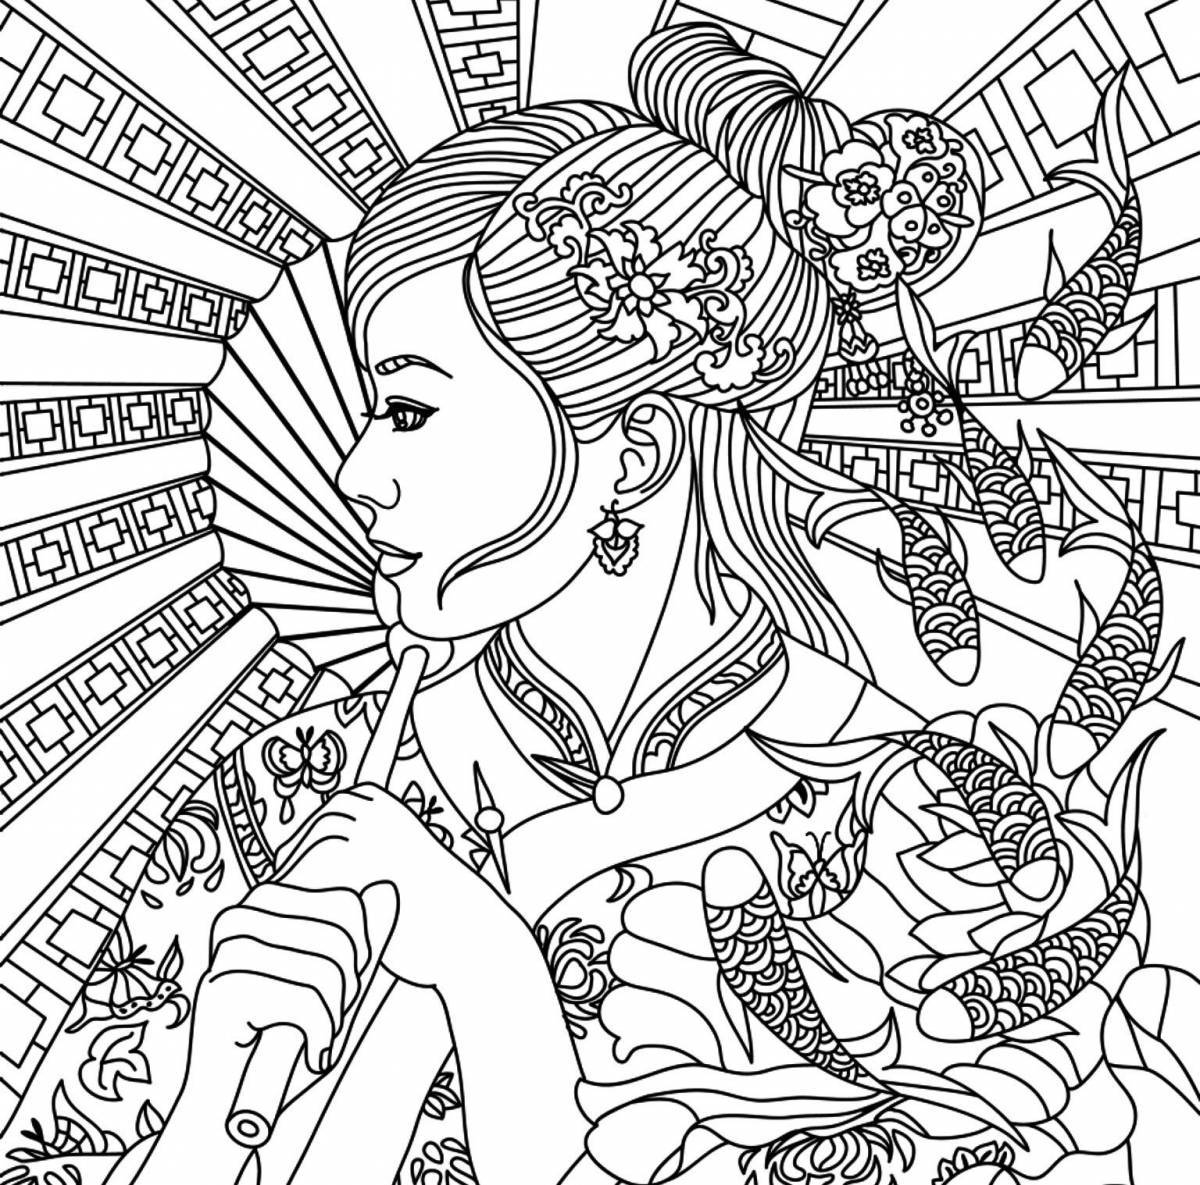 A dreamy coloring book for all adults